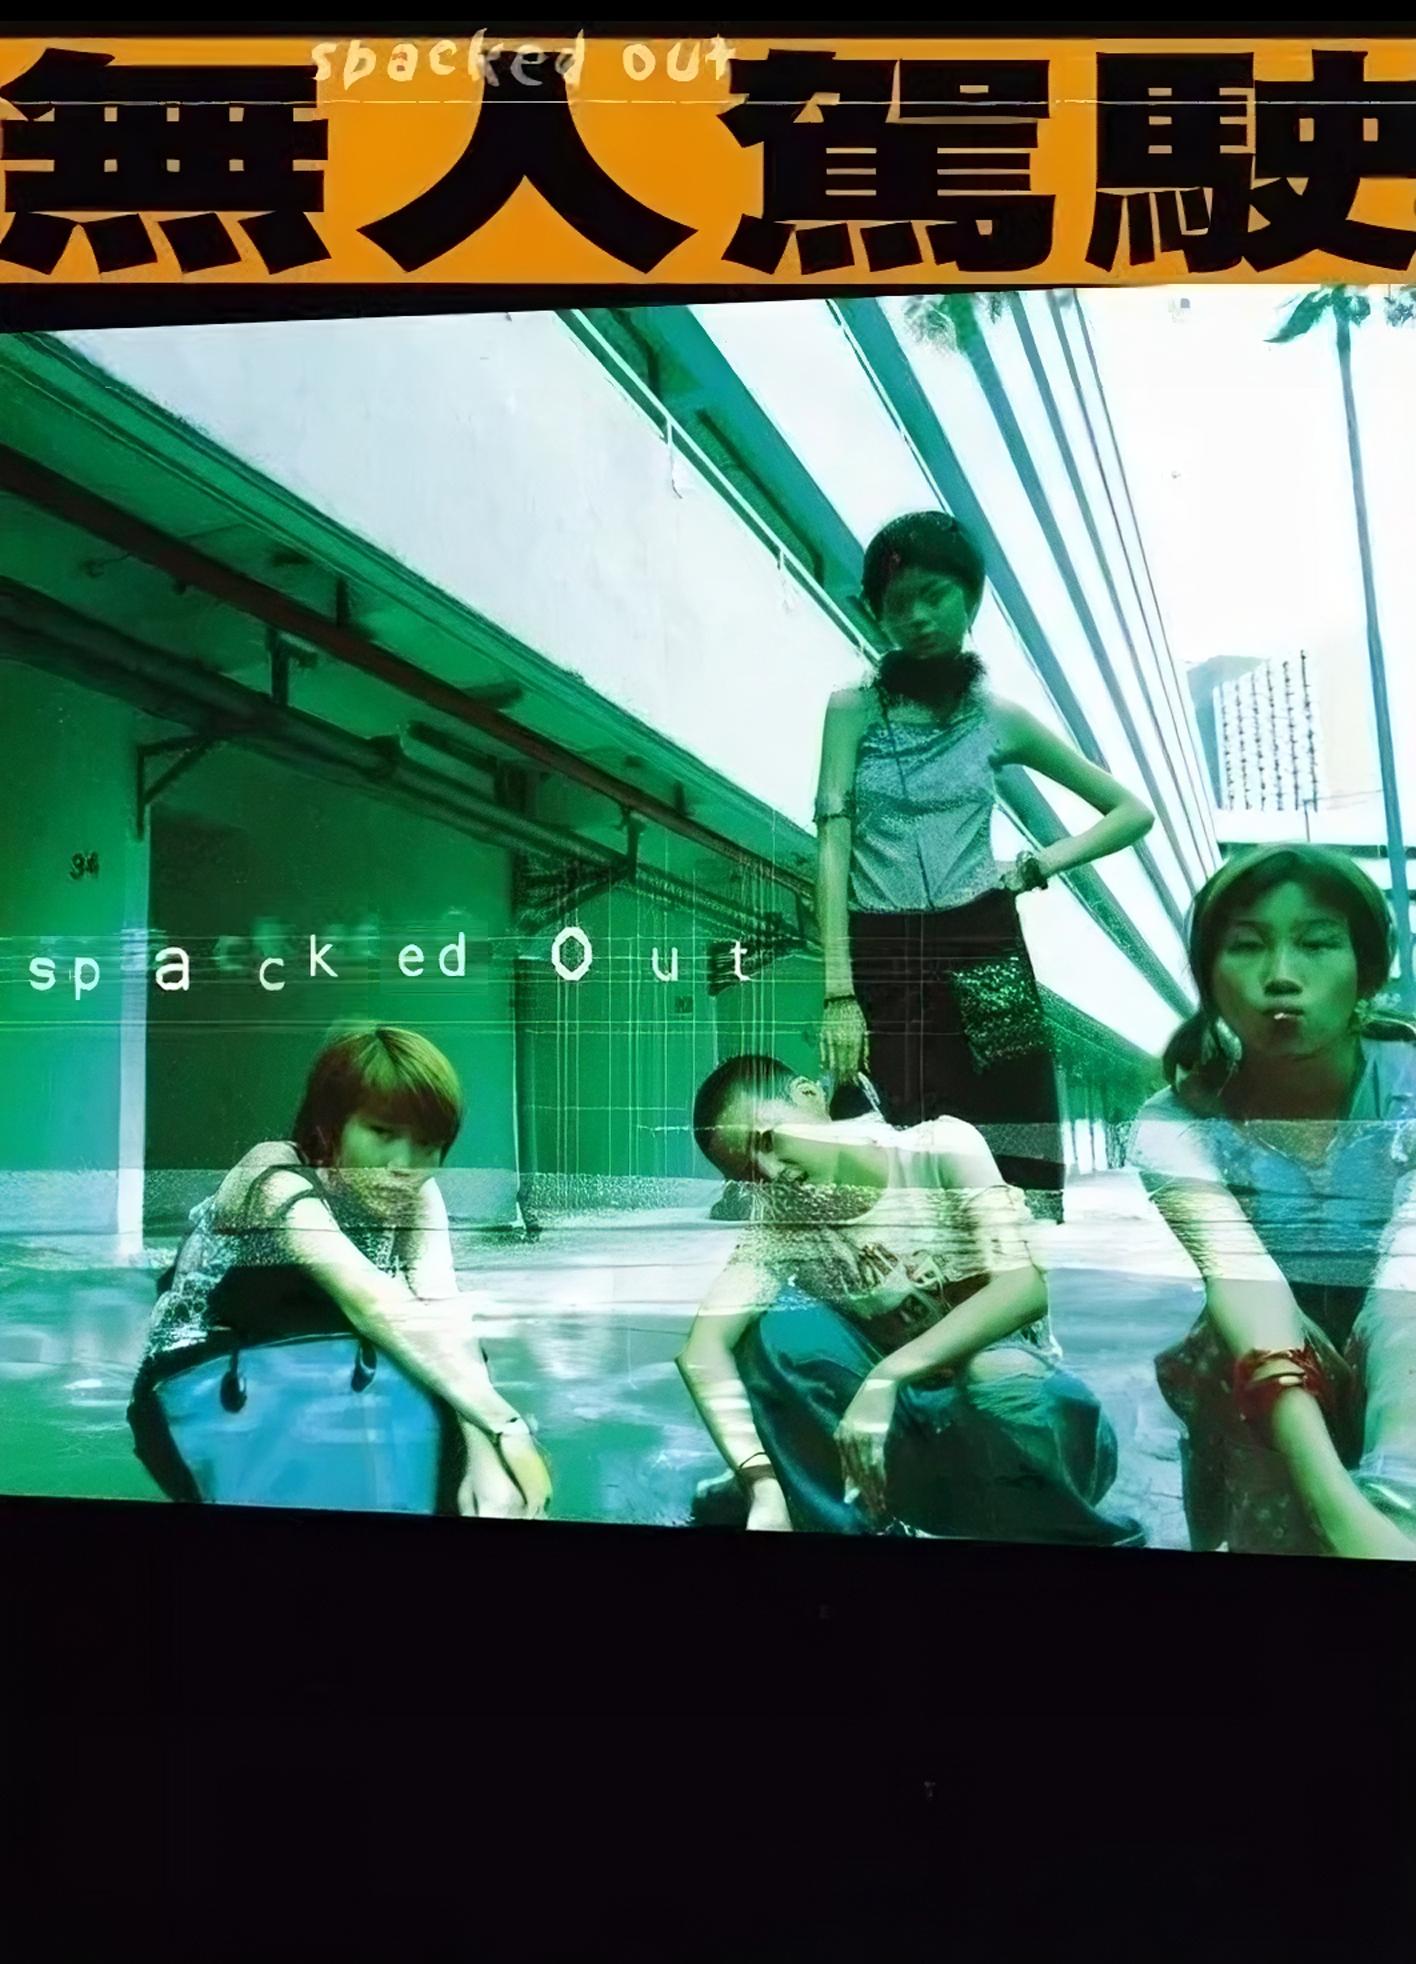 Spacked Out (2000) by Lawrence Ah Mon